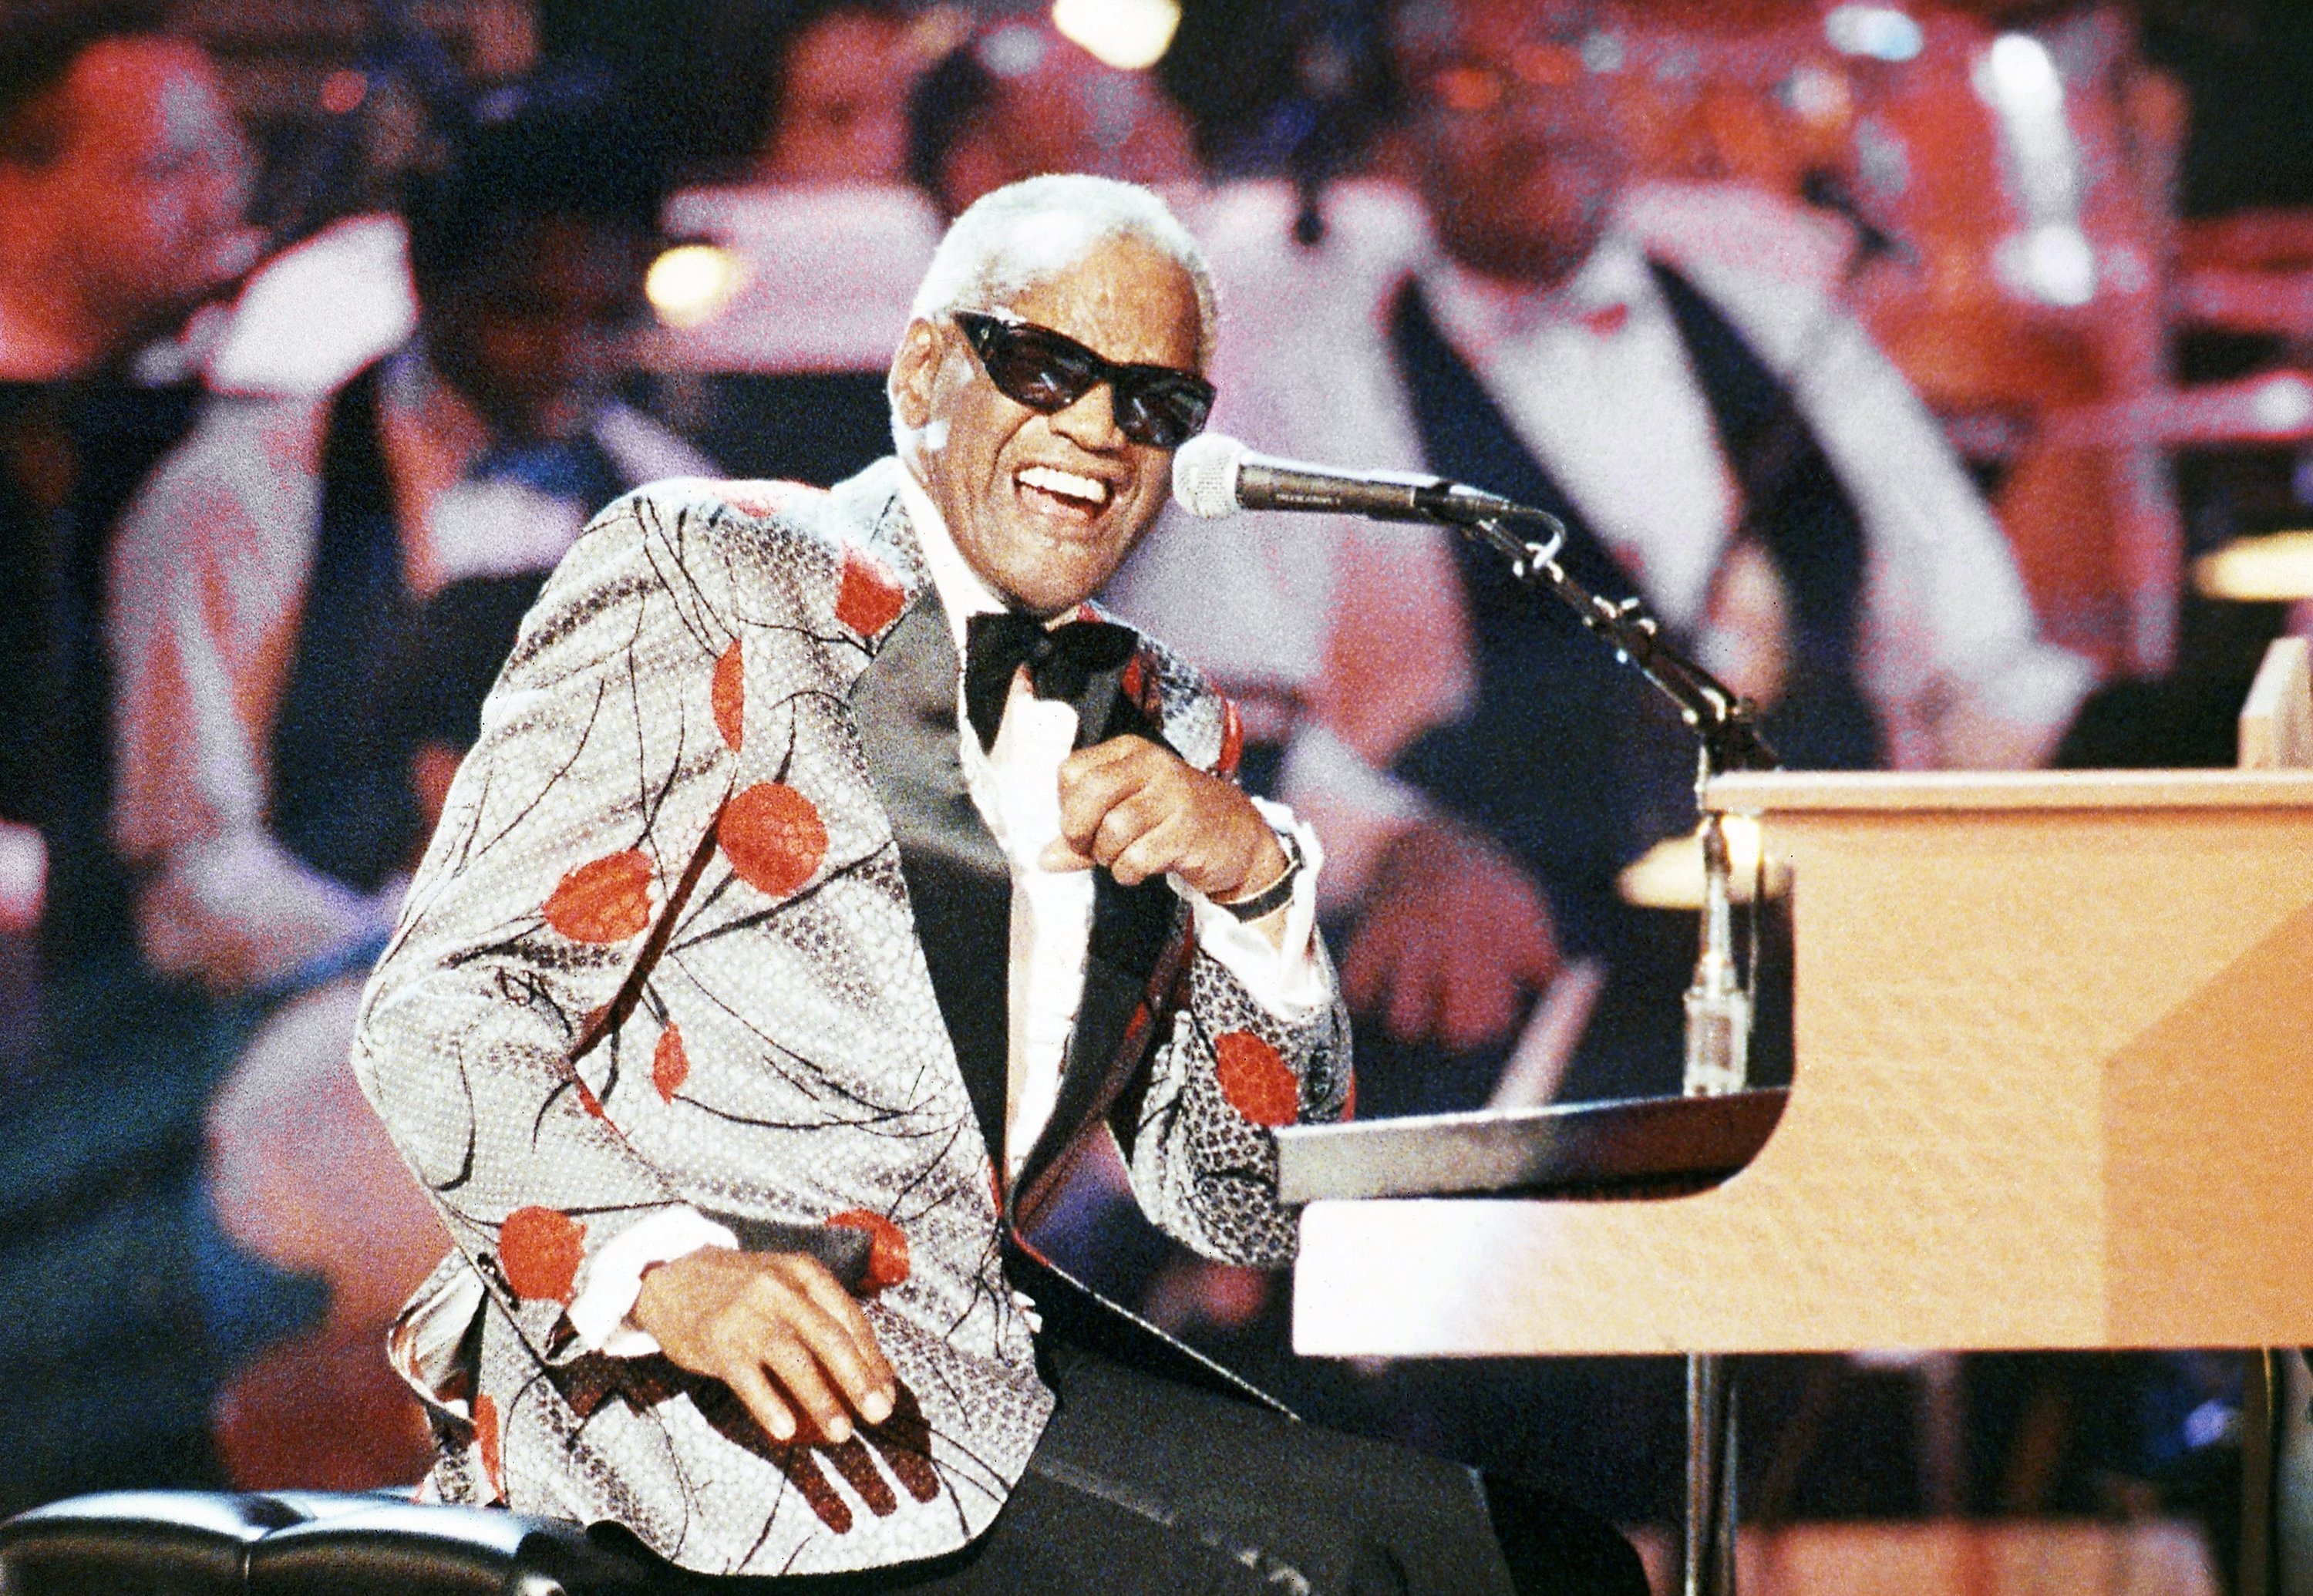 Ray Charles: 'The Genius' blending different musical genres | Daily Sabah